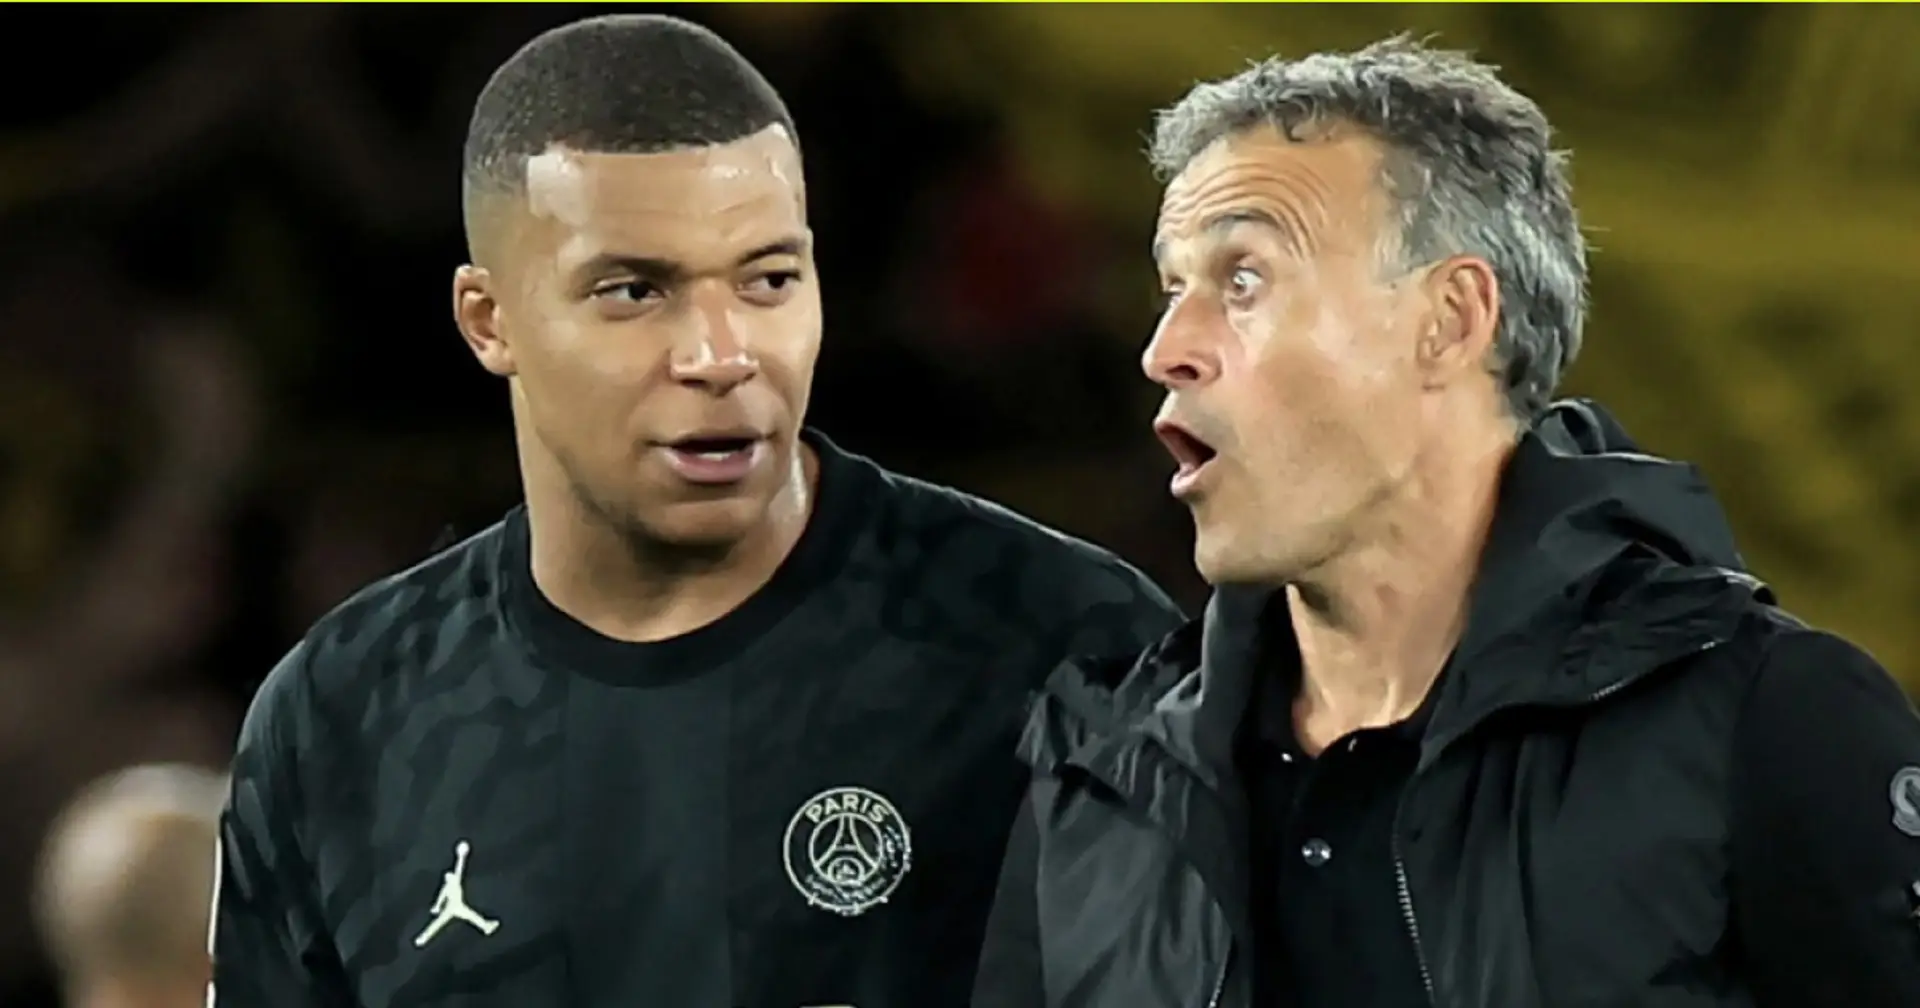 Relationship between Enrique and Mbappe seems to fall apart before Barca clash